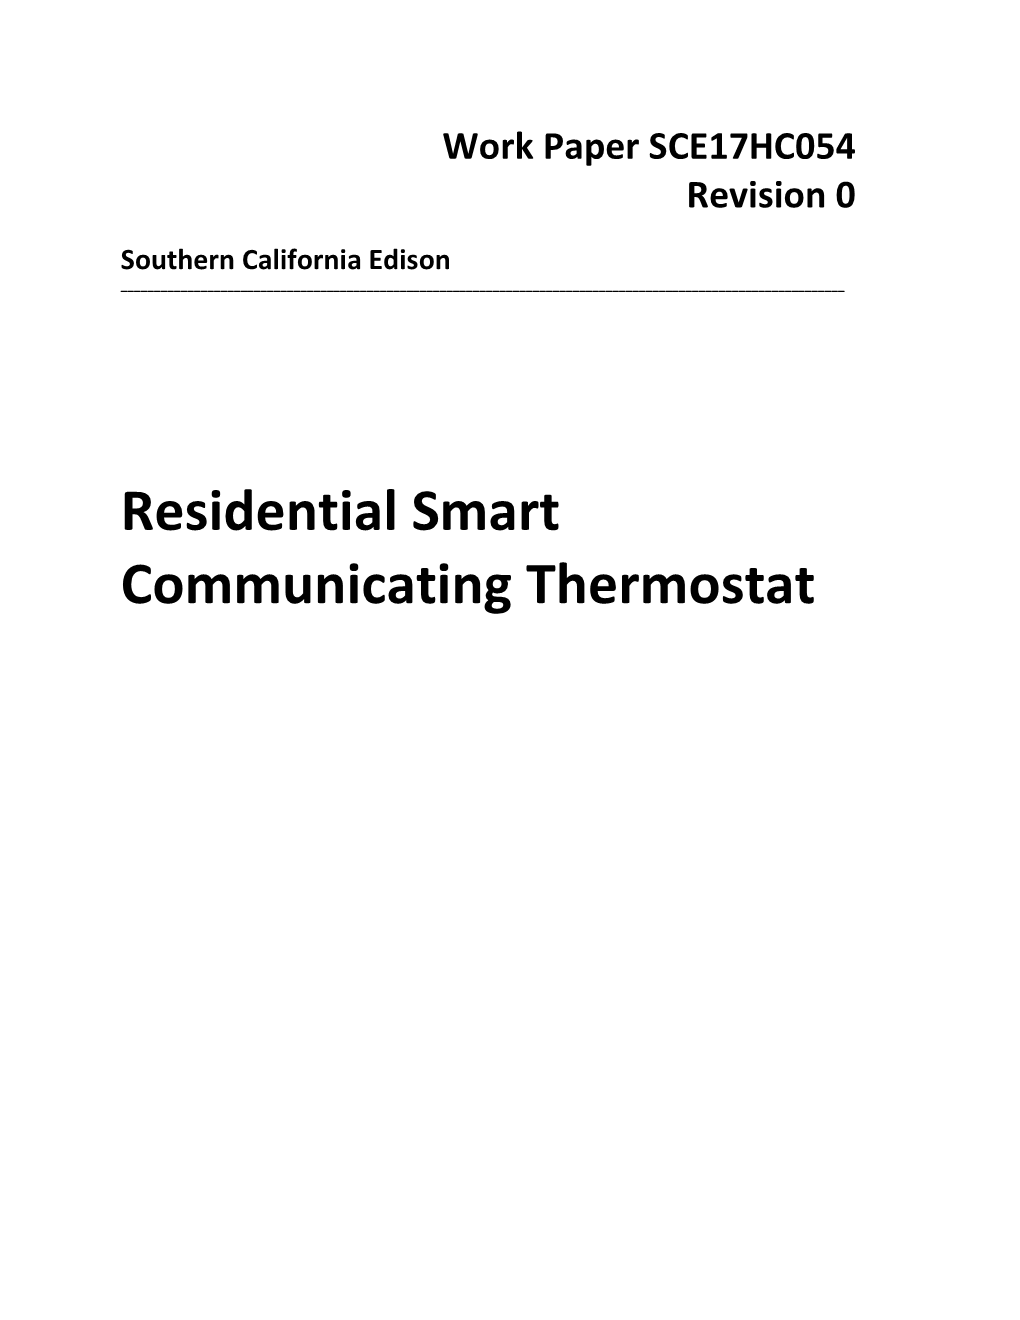 Residential Smart Communicating Thermostat